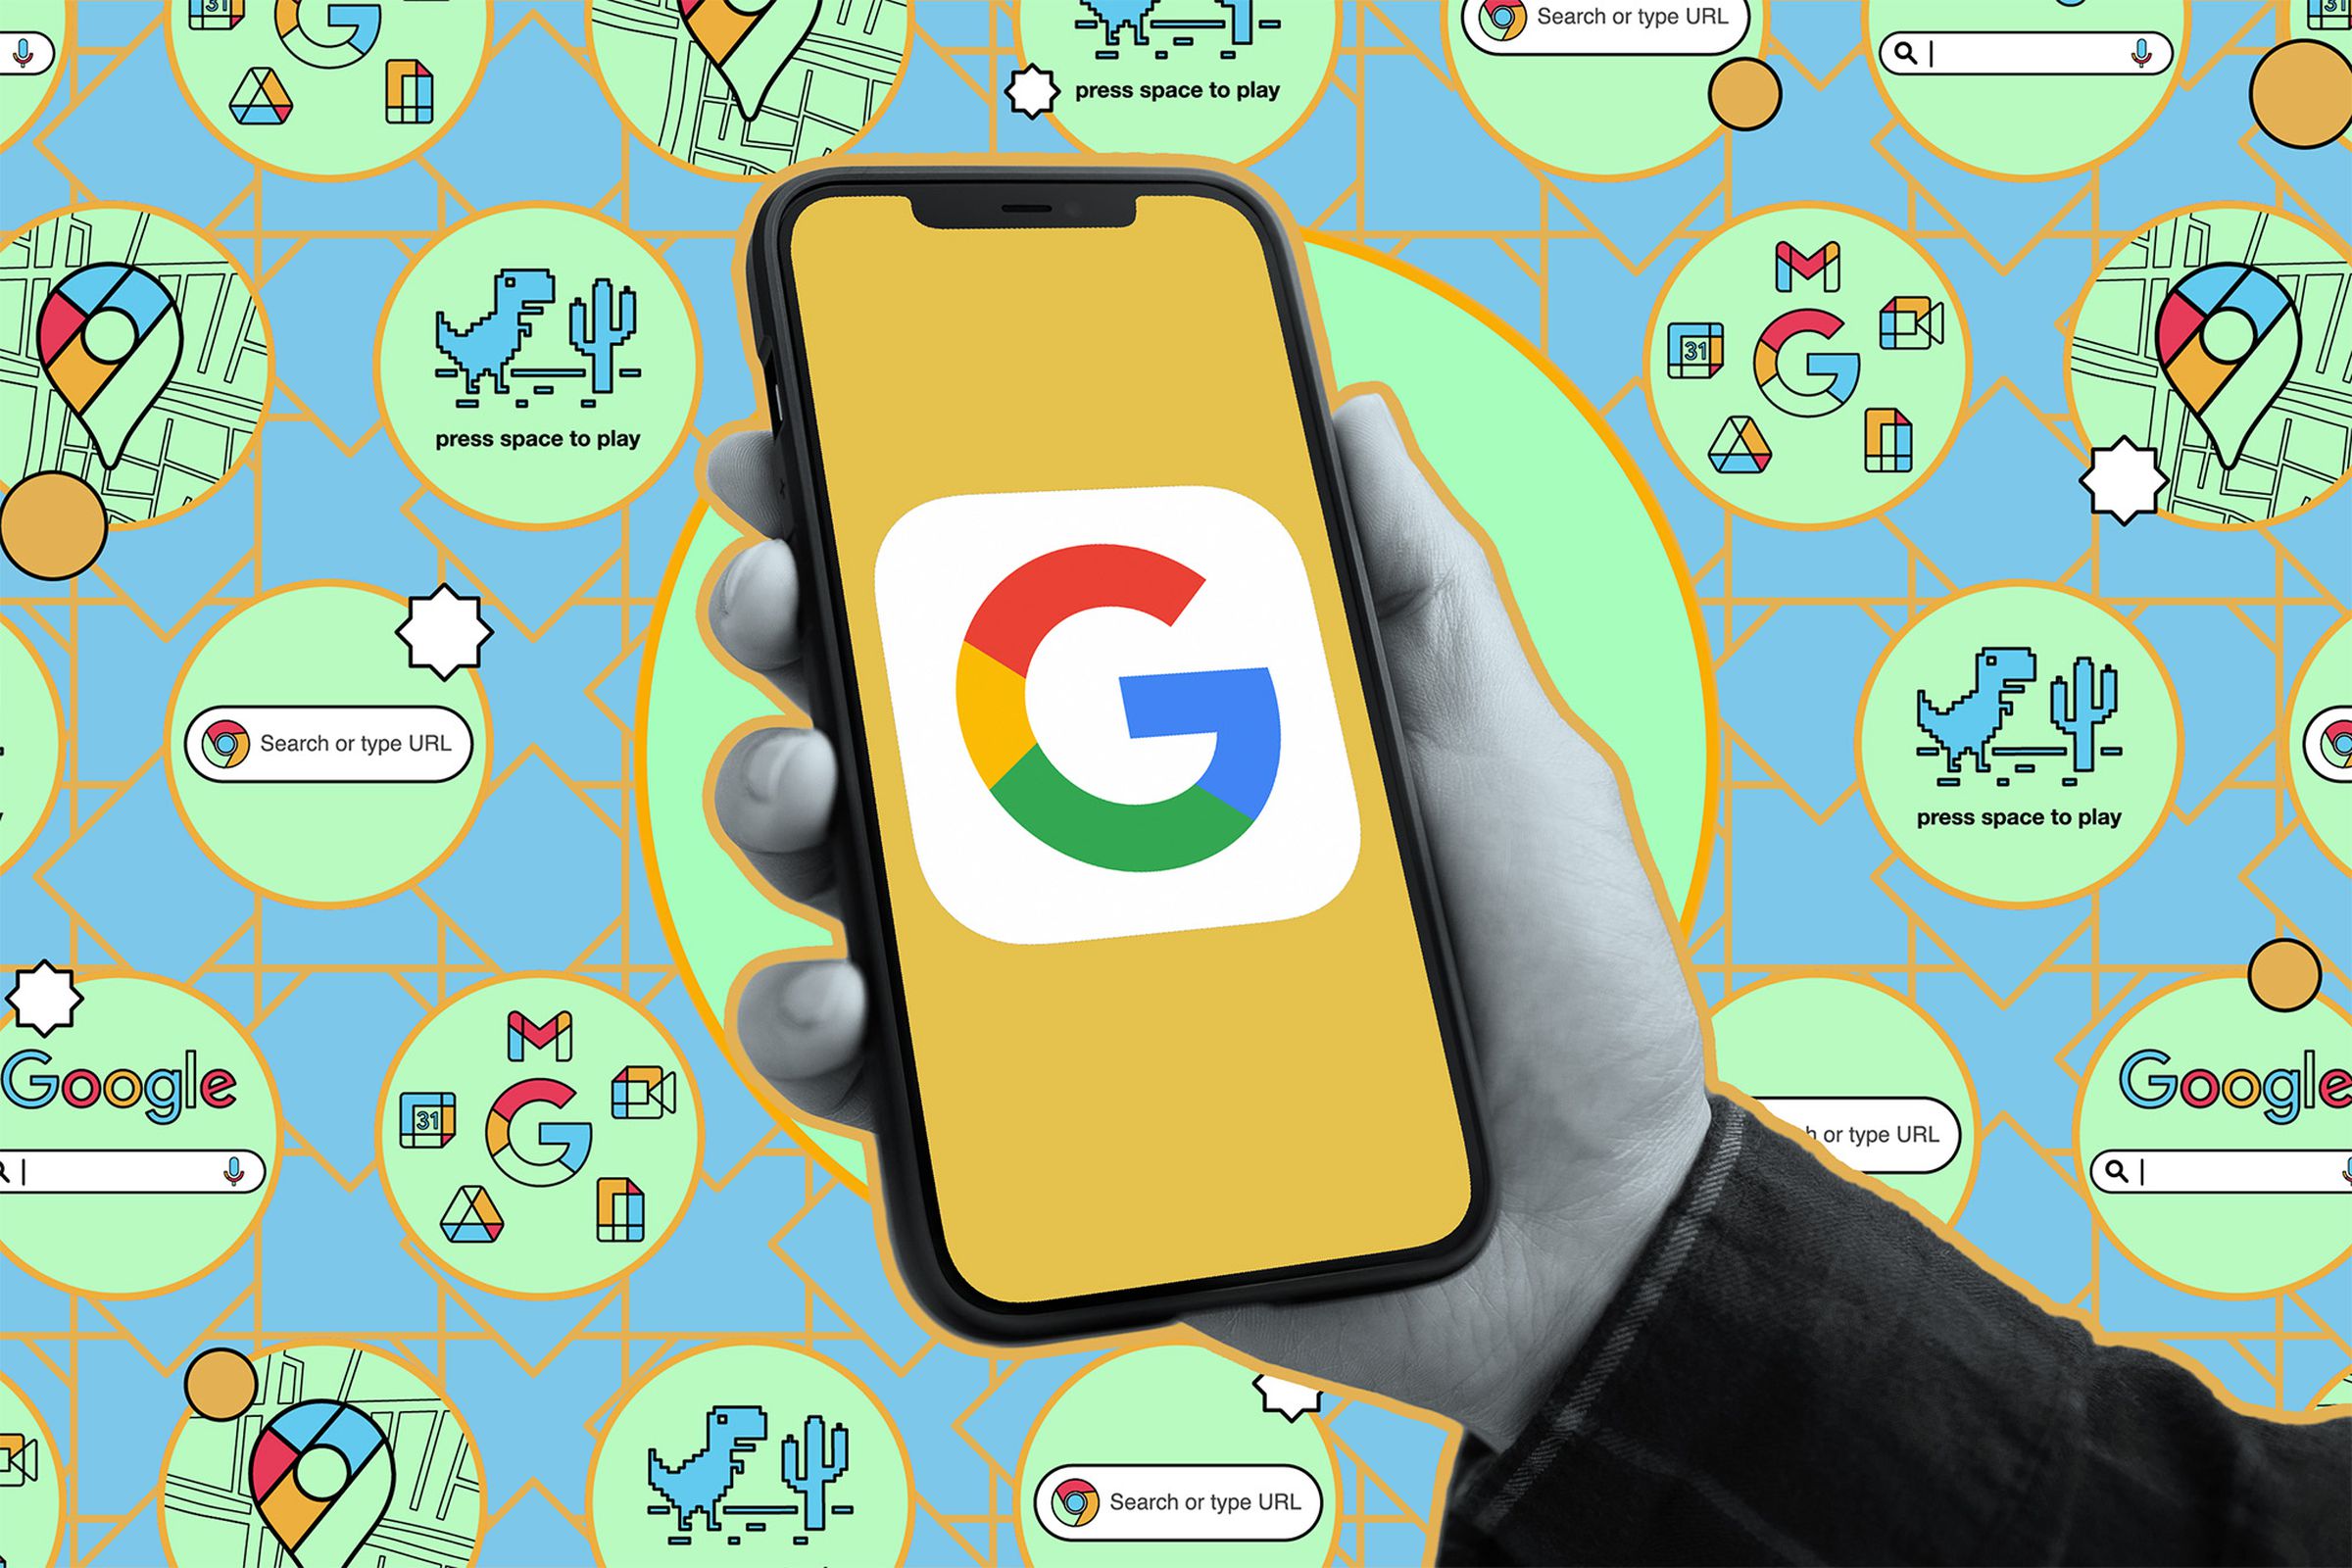 A hand holding a phone with the Google logo on it.